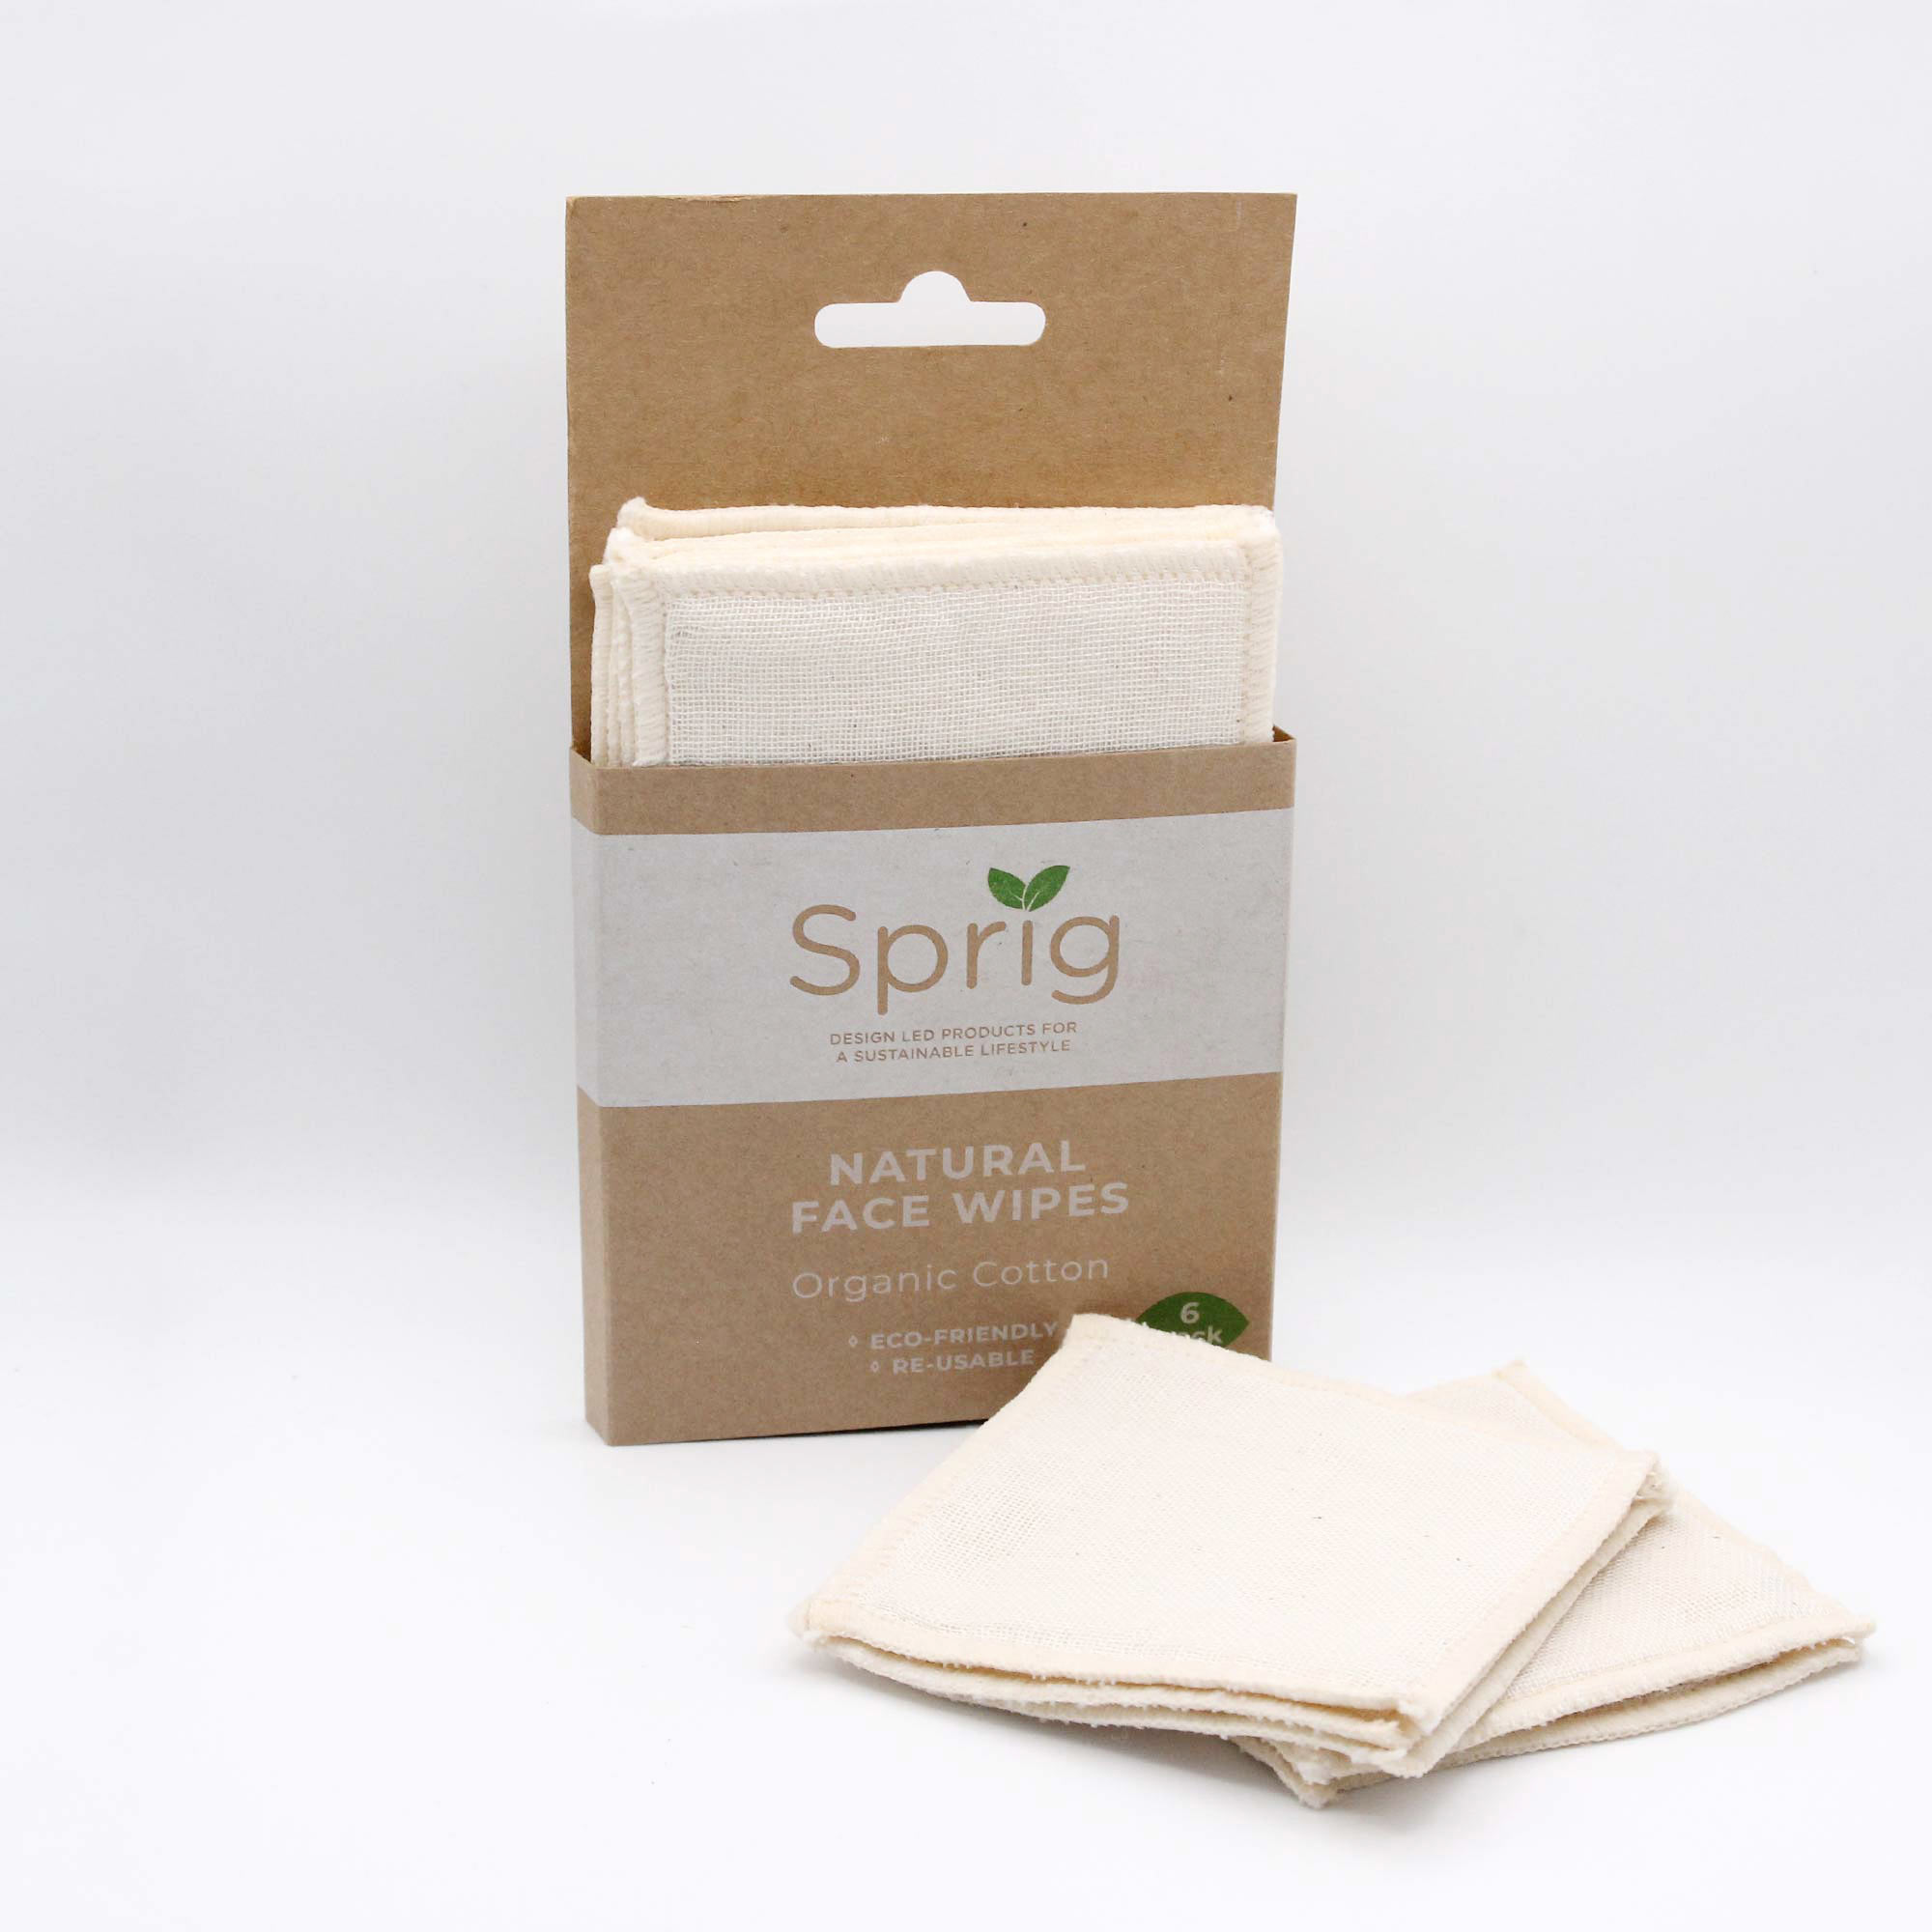 Sprig Japan Organic Cotton Face Wipes 6 Pack